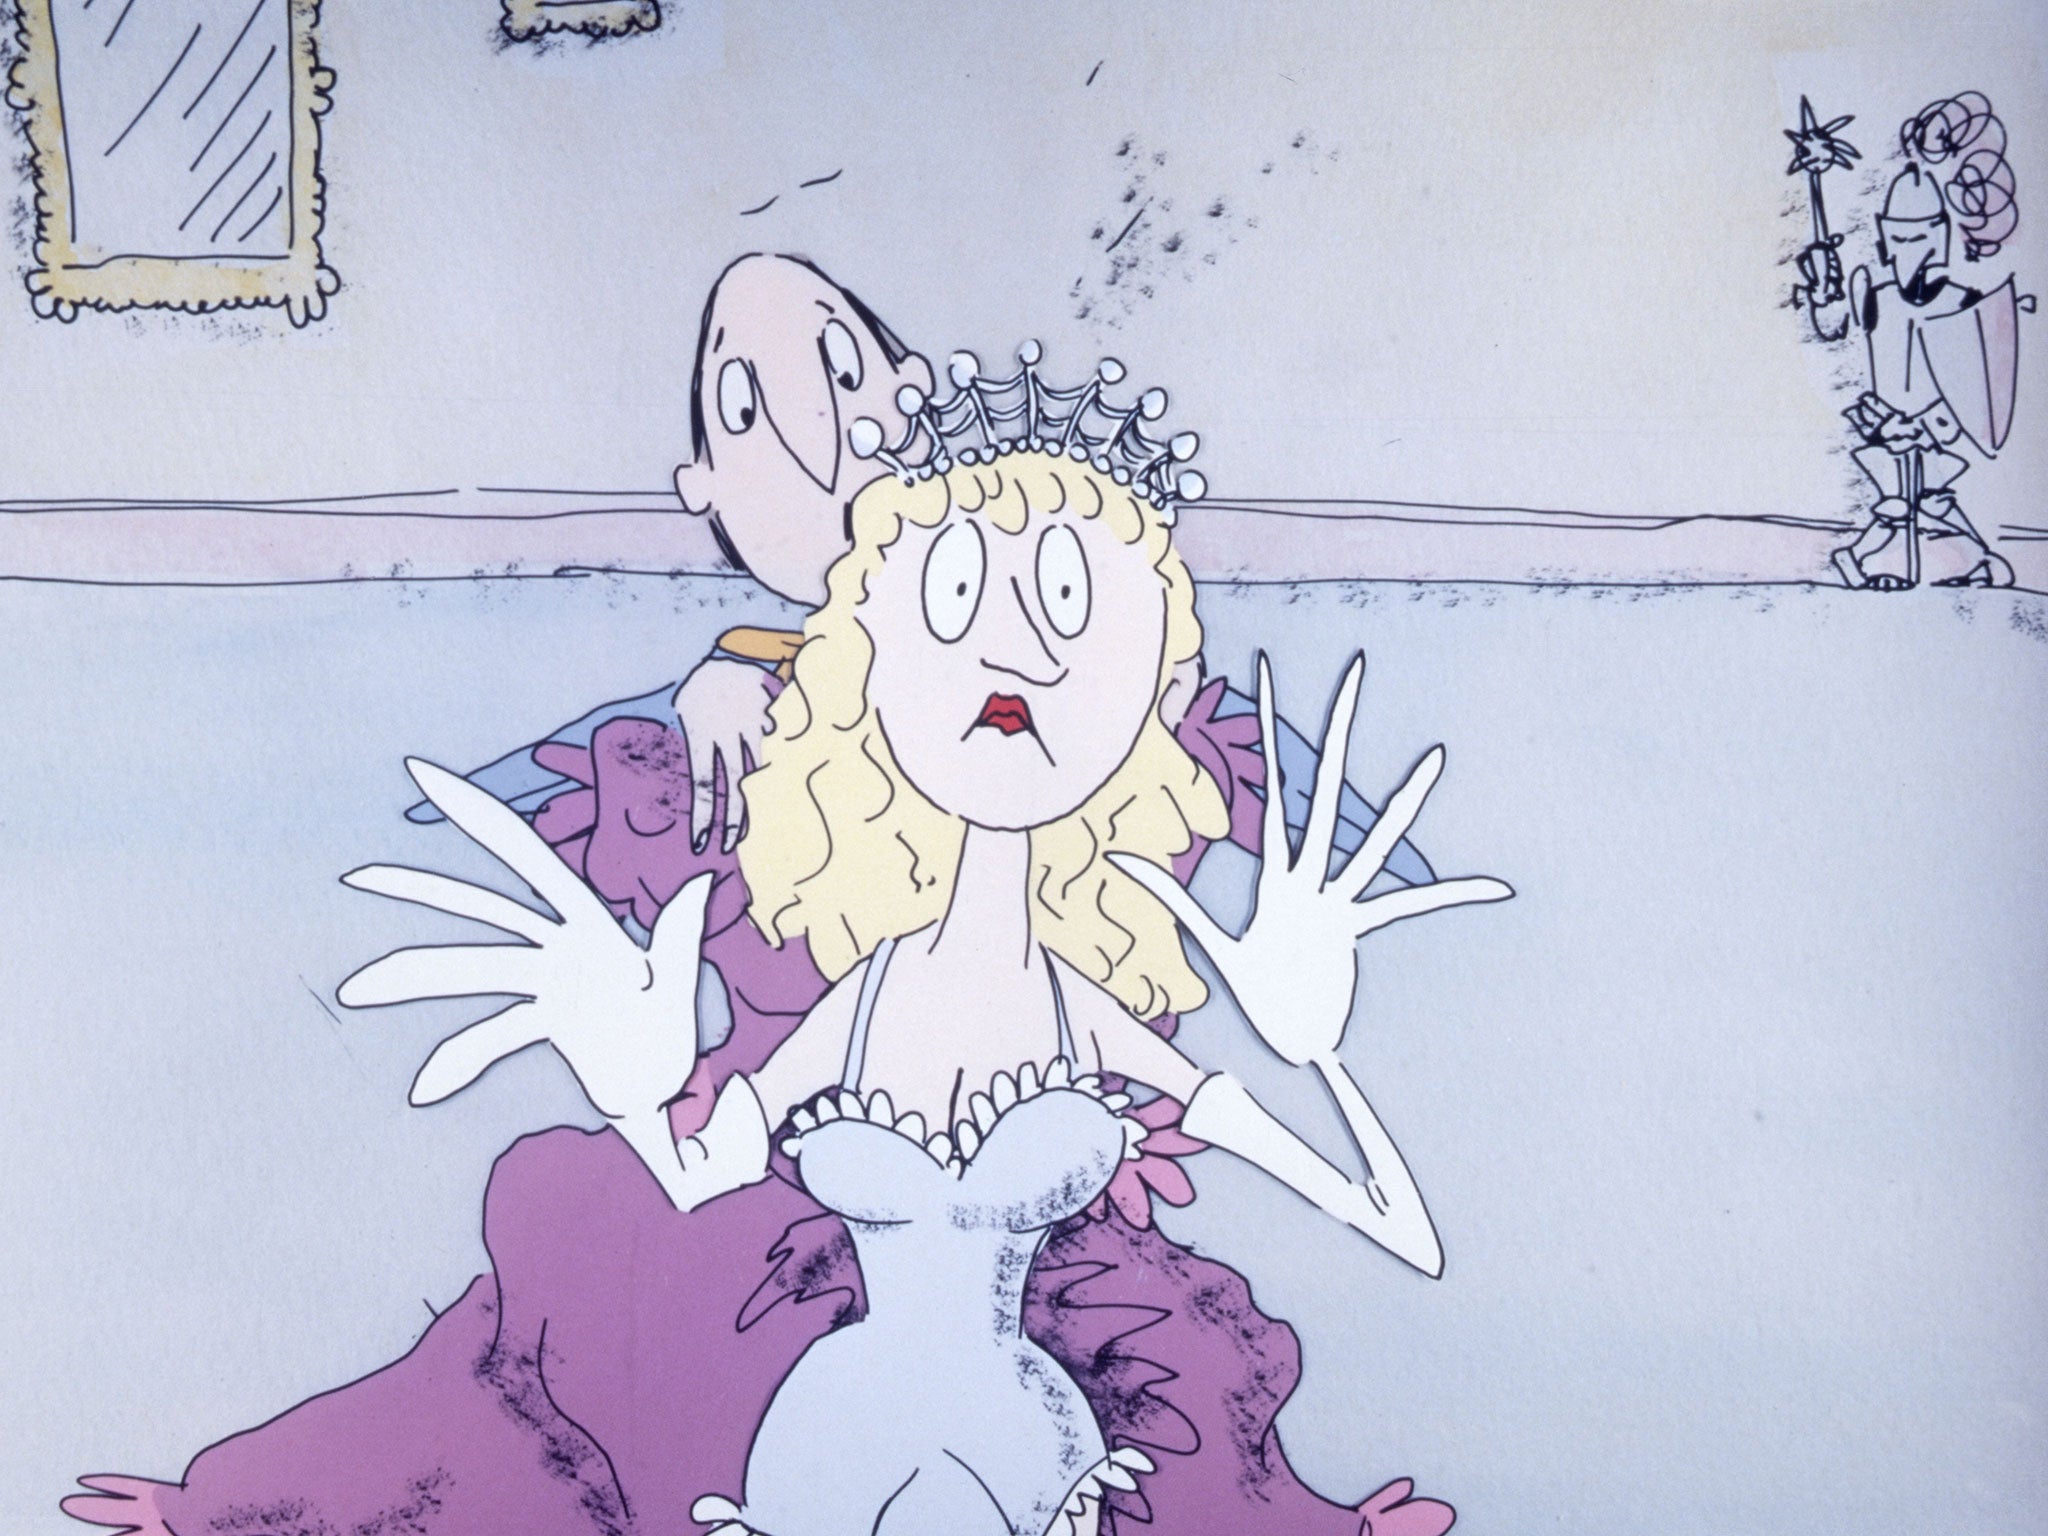 A still from ITV's 'Revolting Rhymes and Dirty Beasts' animation based on Quentin Blake's original illustrations